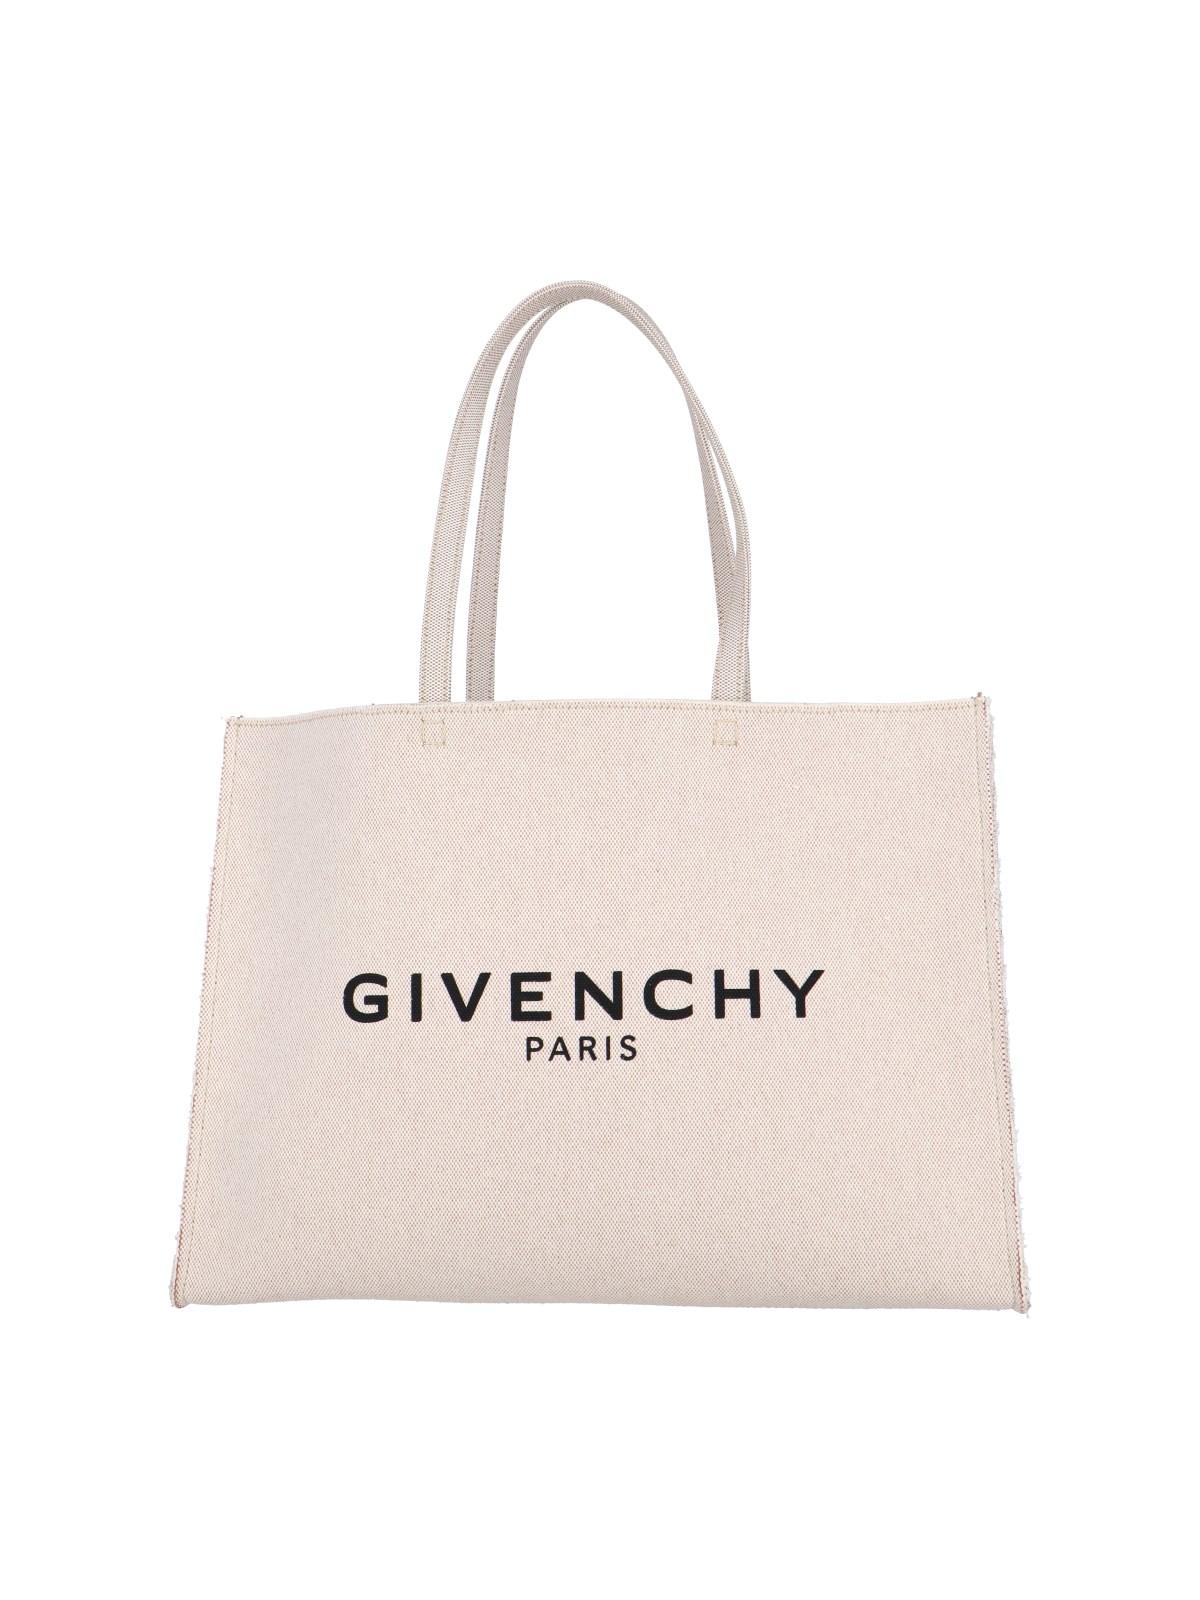 Givenchy G Large Tote Bag in Natural | Lyst